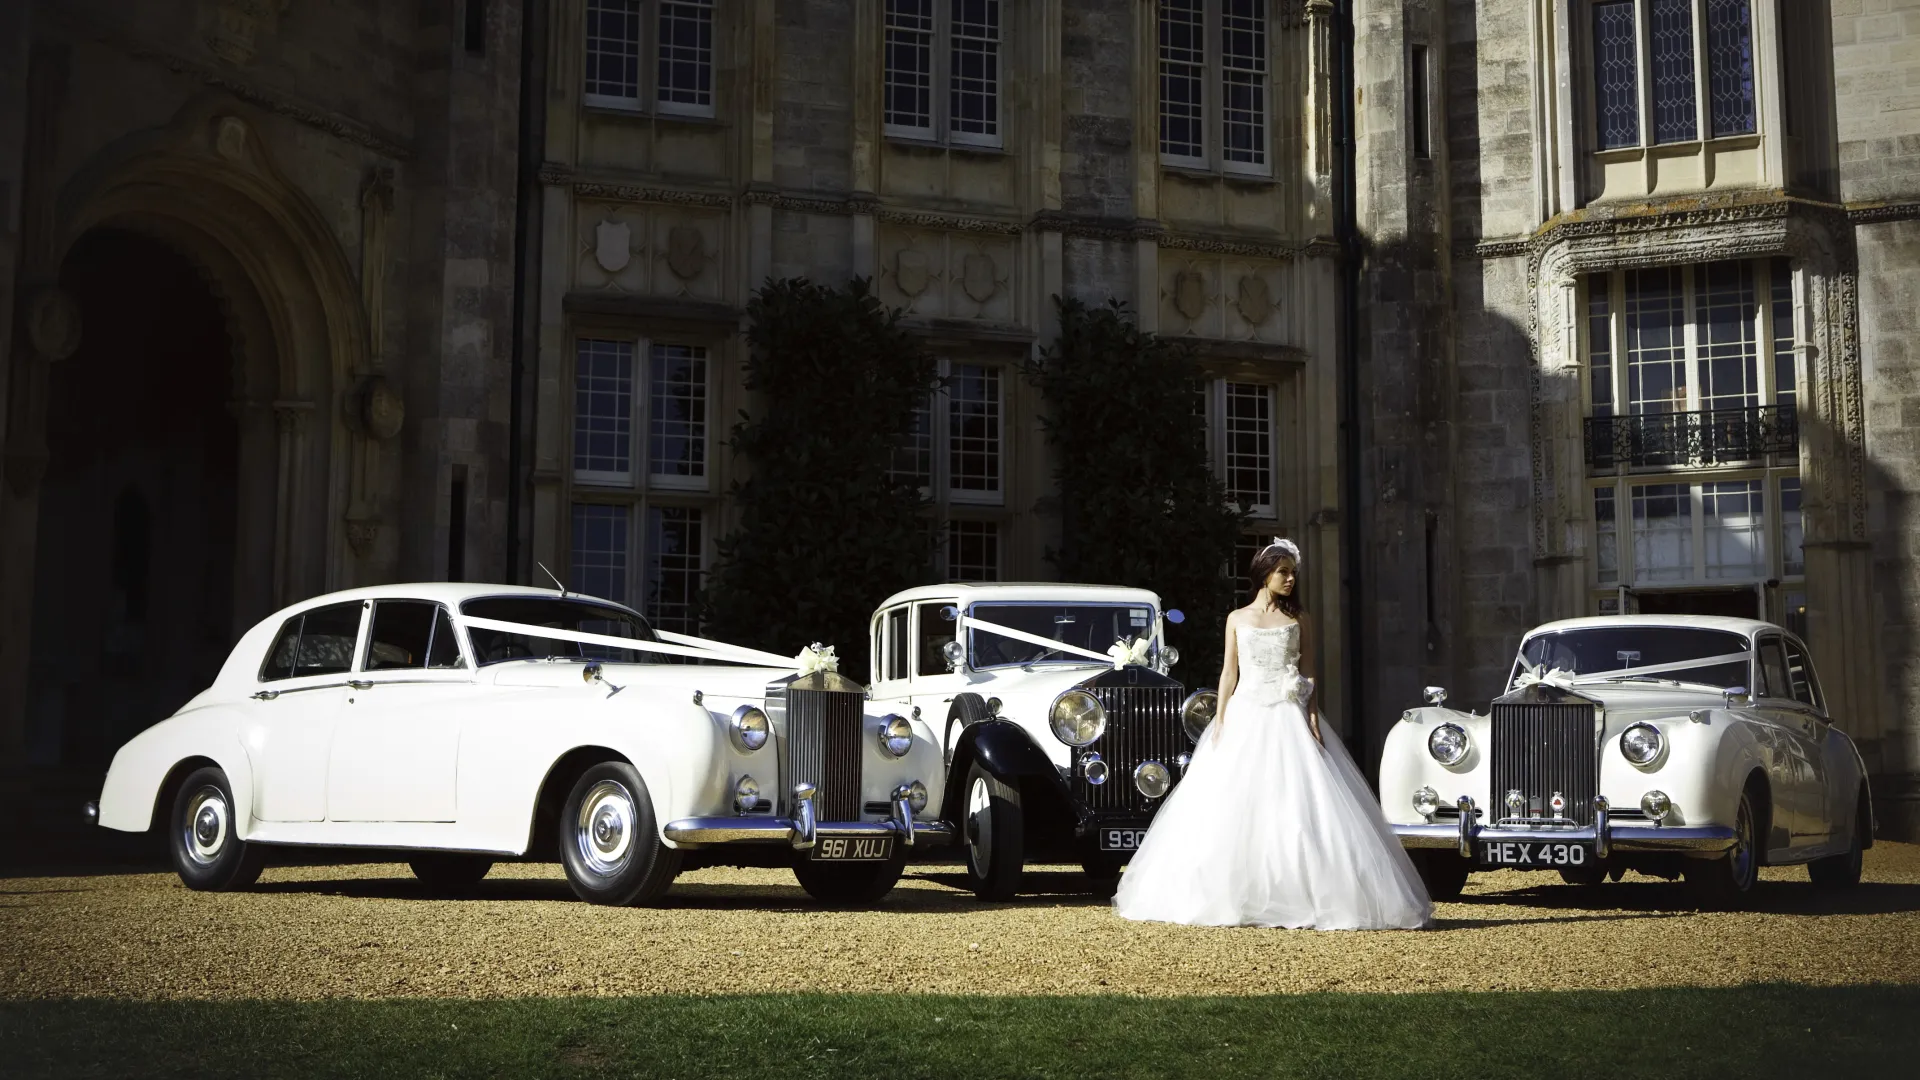 A Double Decker Routemaster Bus Leaving the Venue and a White Classic Rolls-Royce Entering the South Wales Wedding Venue. Both decorated with White Ribbons.